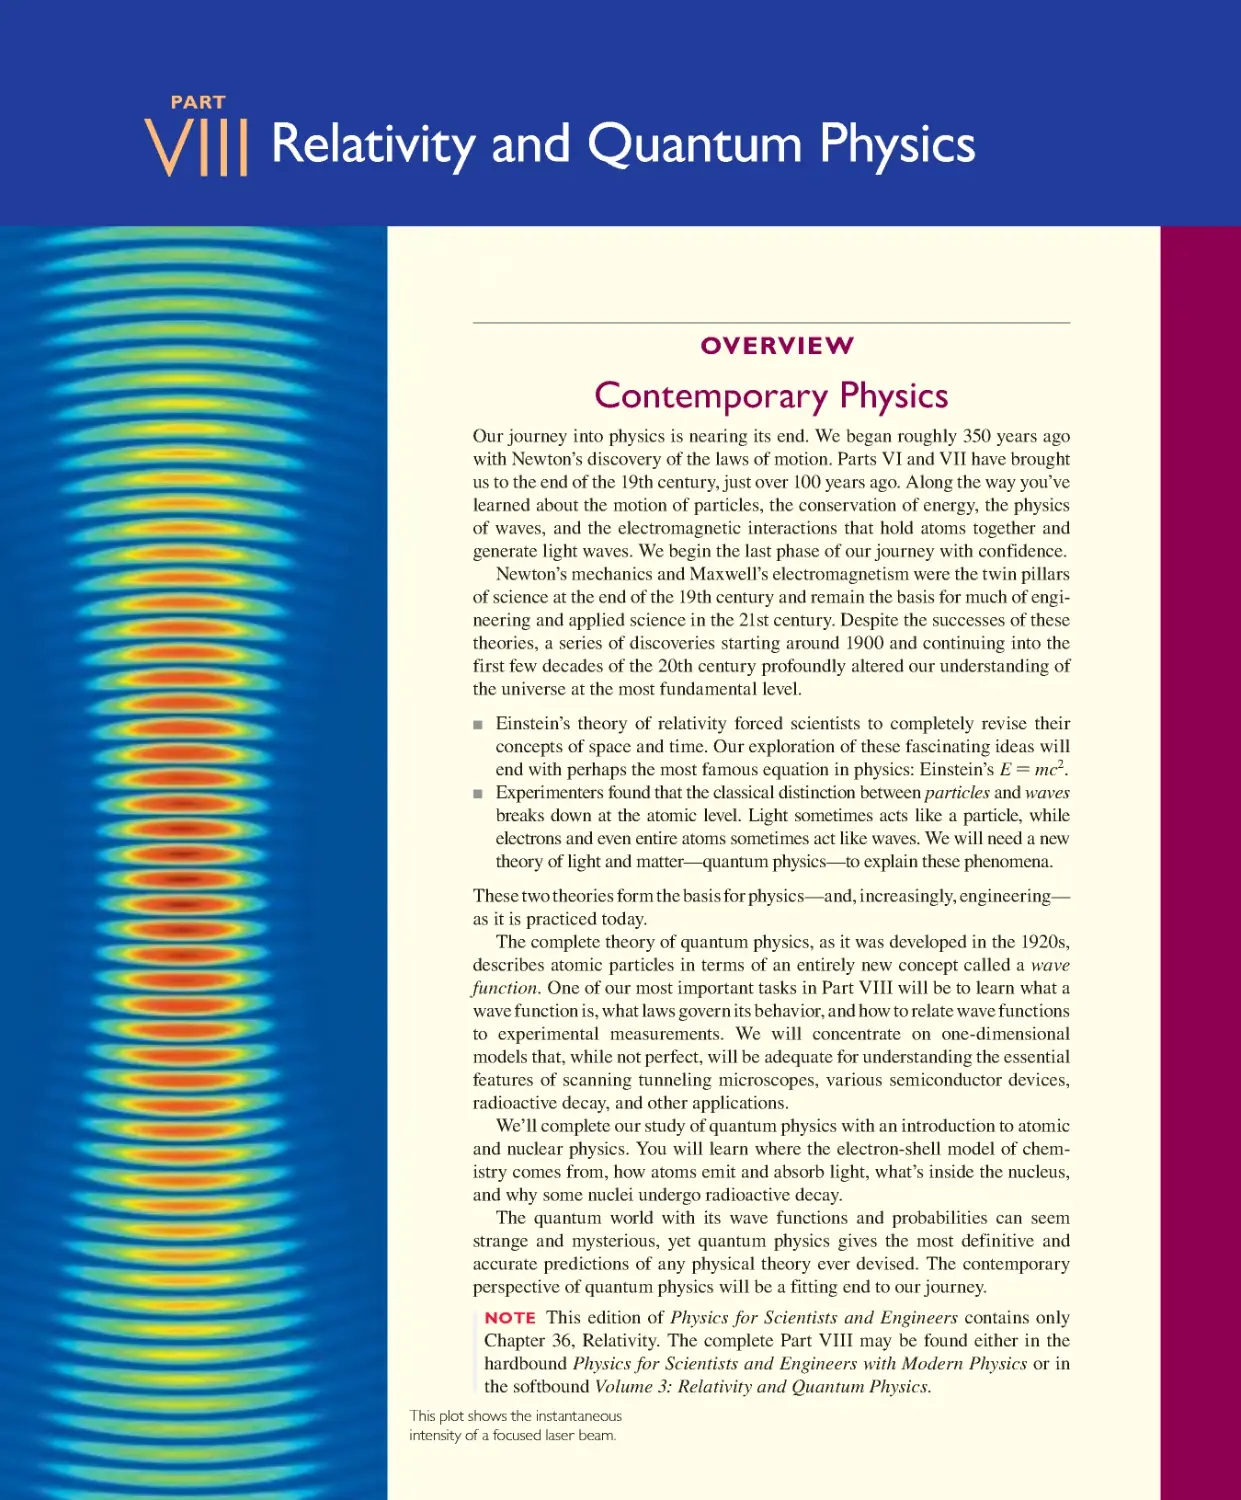 Part VIII: Relativity and Quantum Physics: Overview: Contemporary Physics